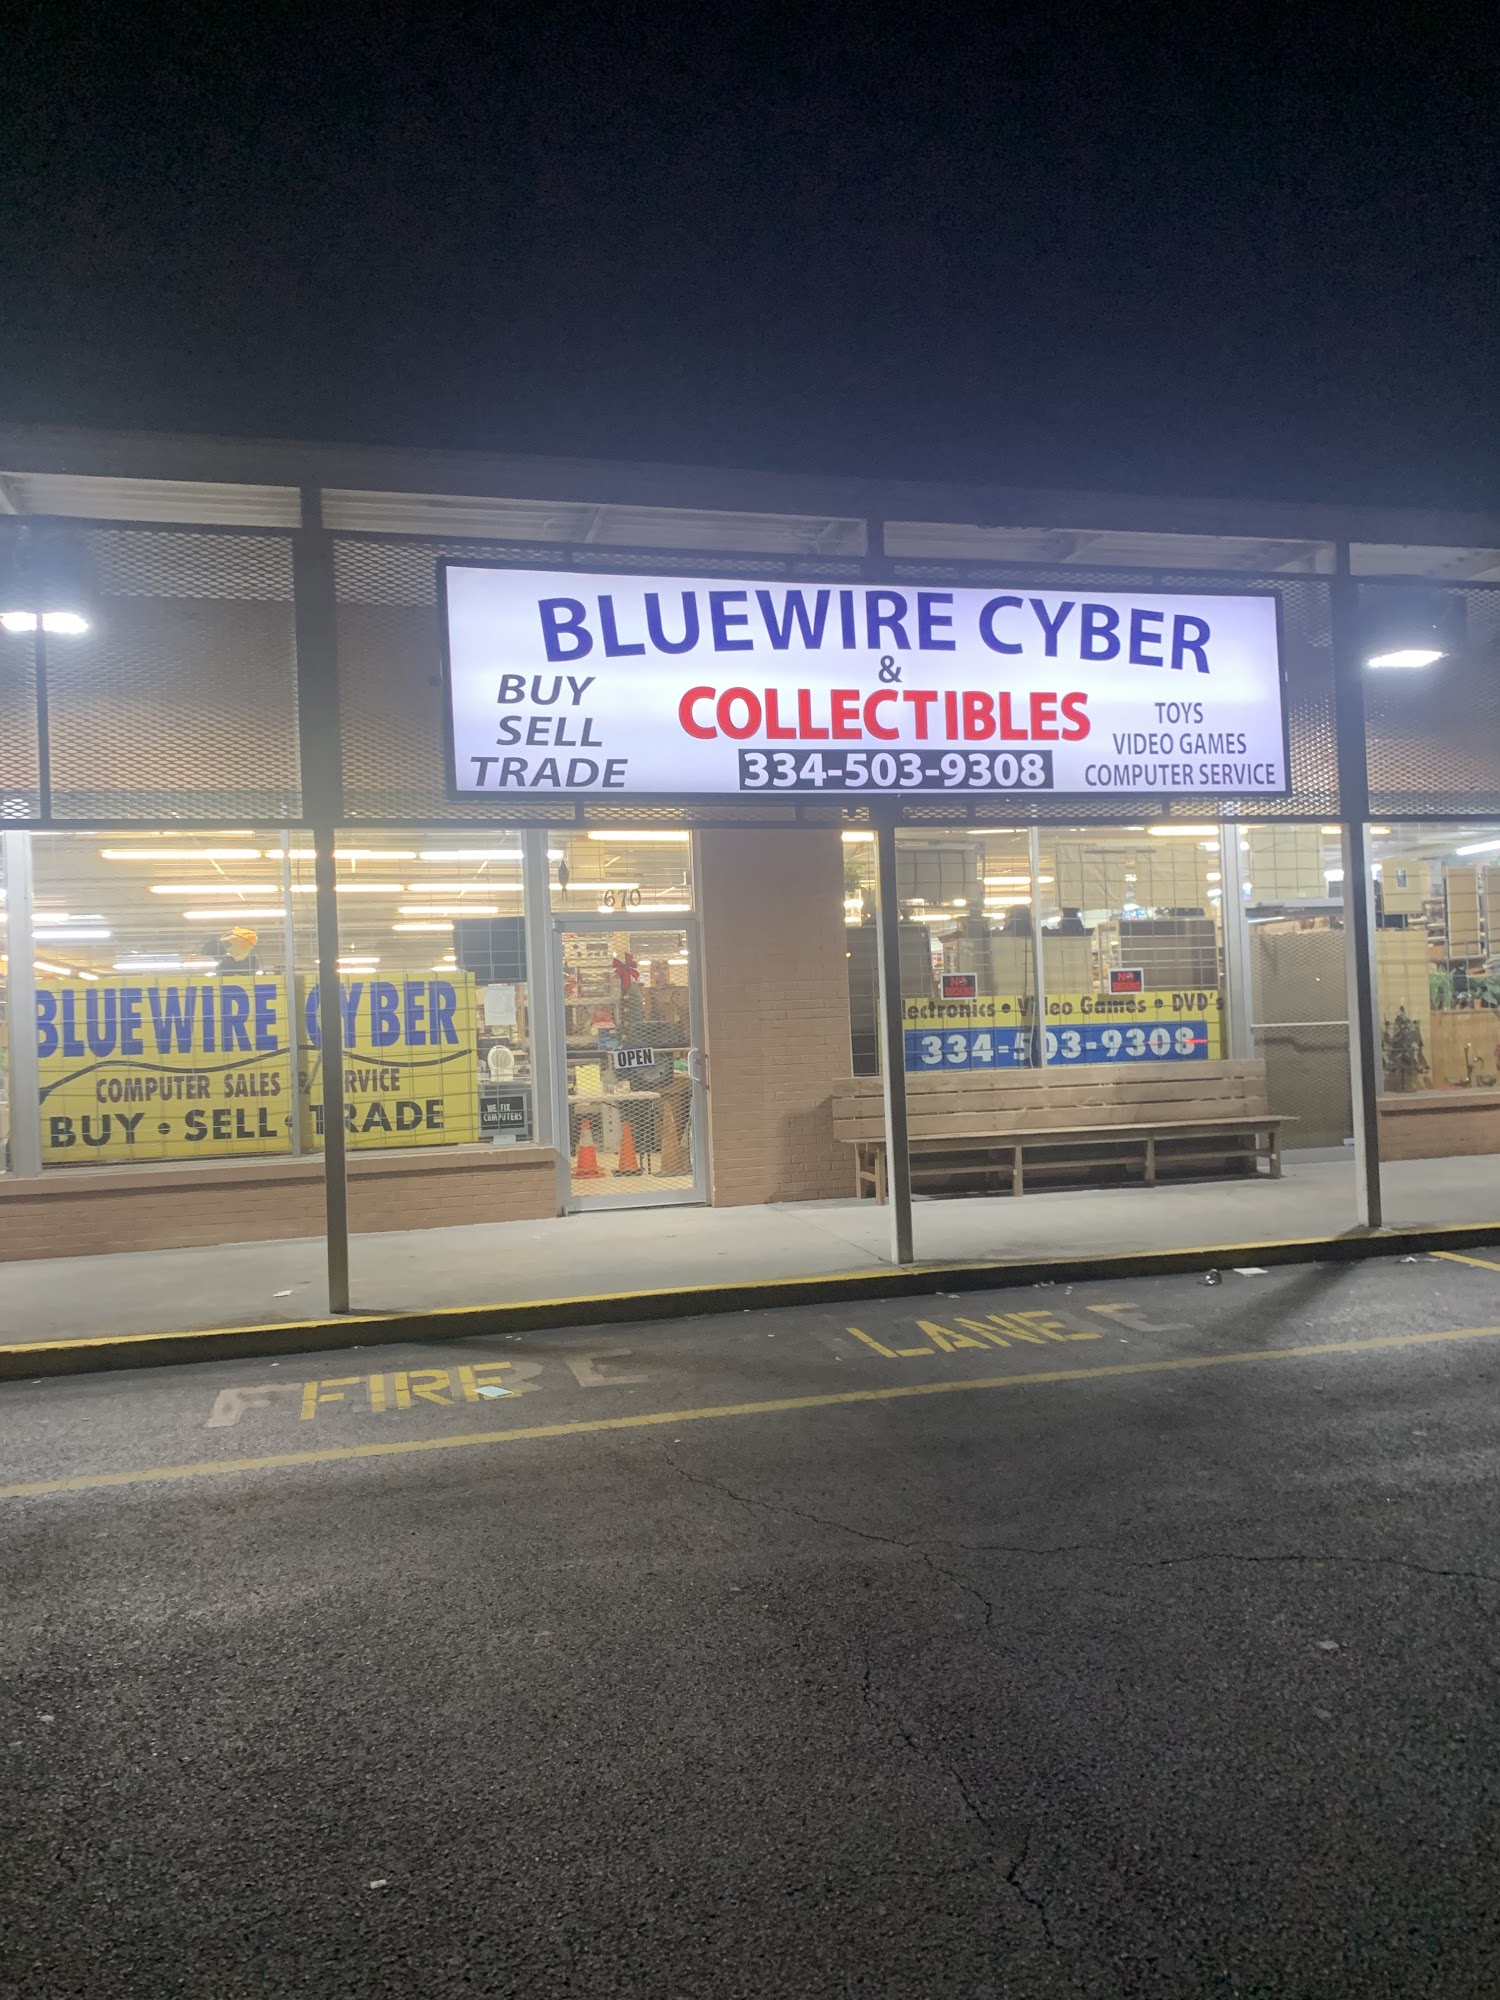 Bluewire Cyber & Collectibles